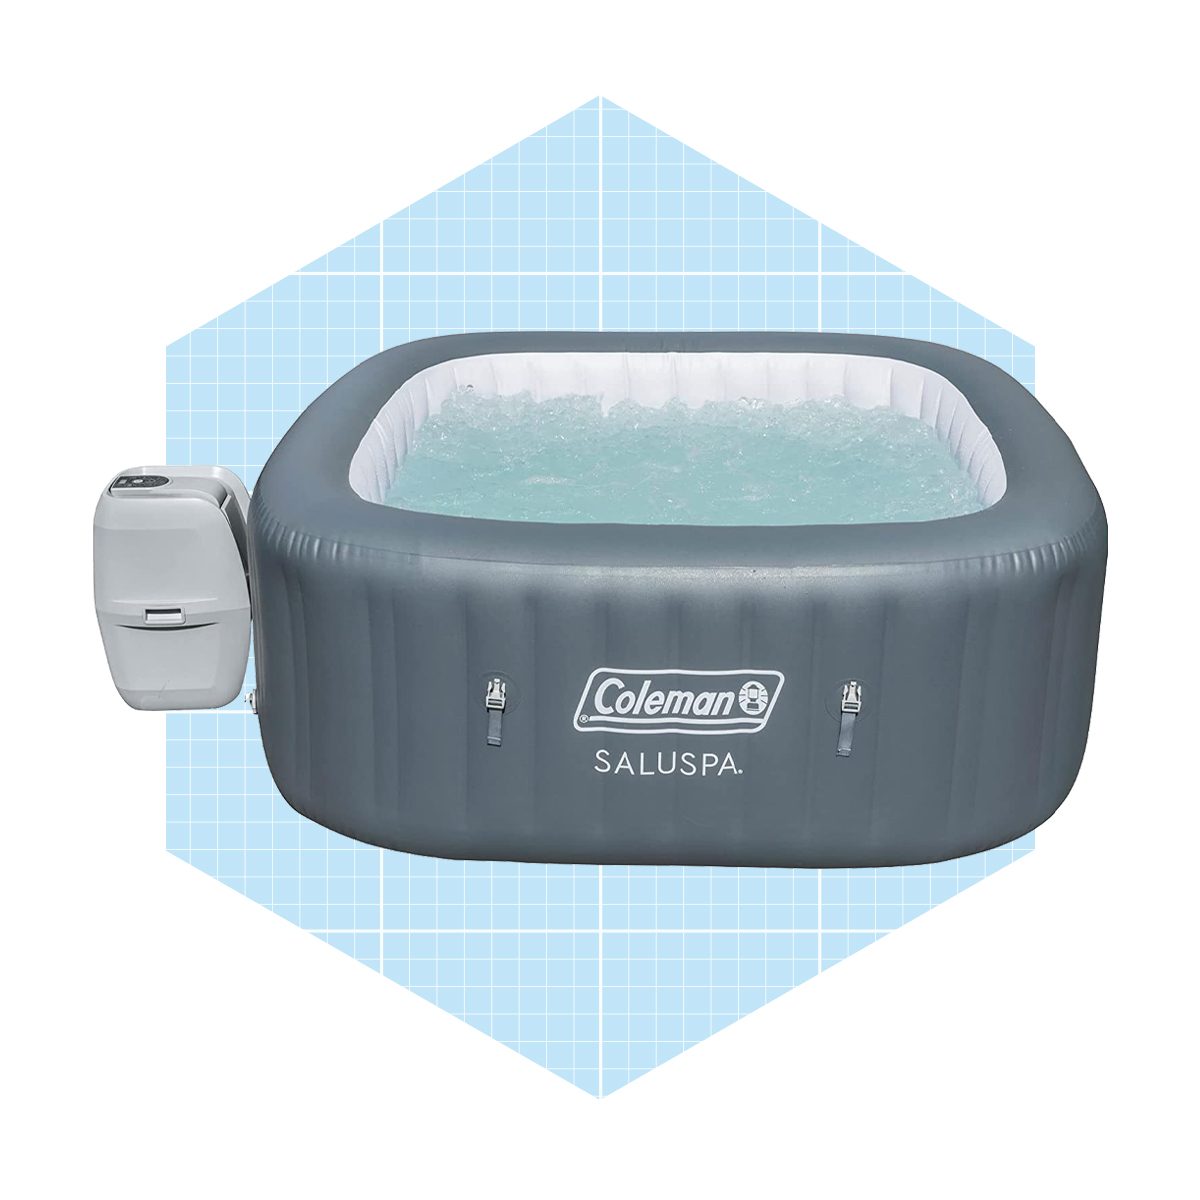 Coleman Bw Saluspa 4 Person Portable Inflatable Outdoor Square Hot Tub Ecomm Amazon.com